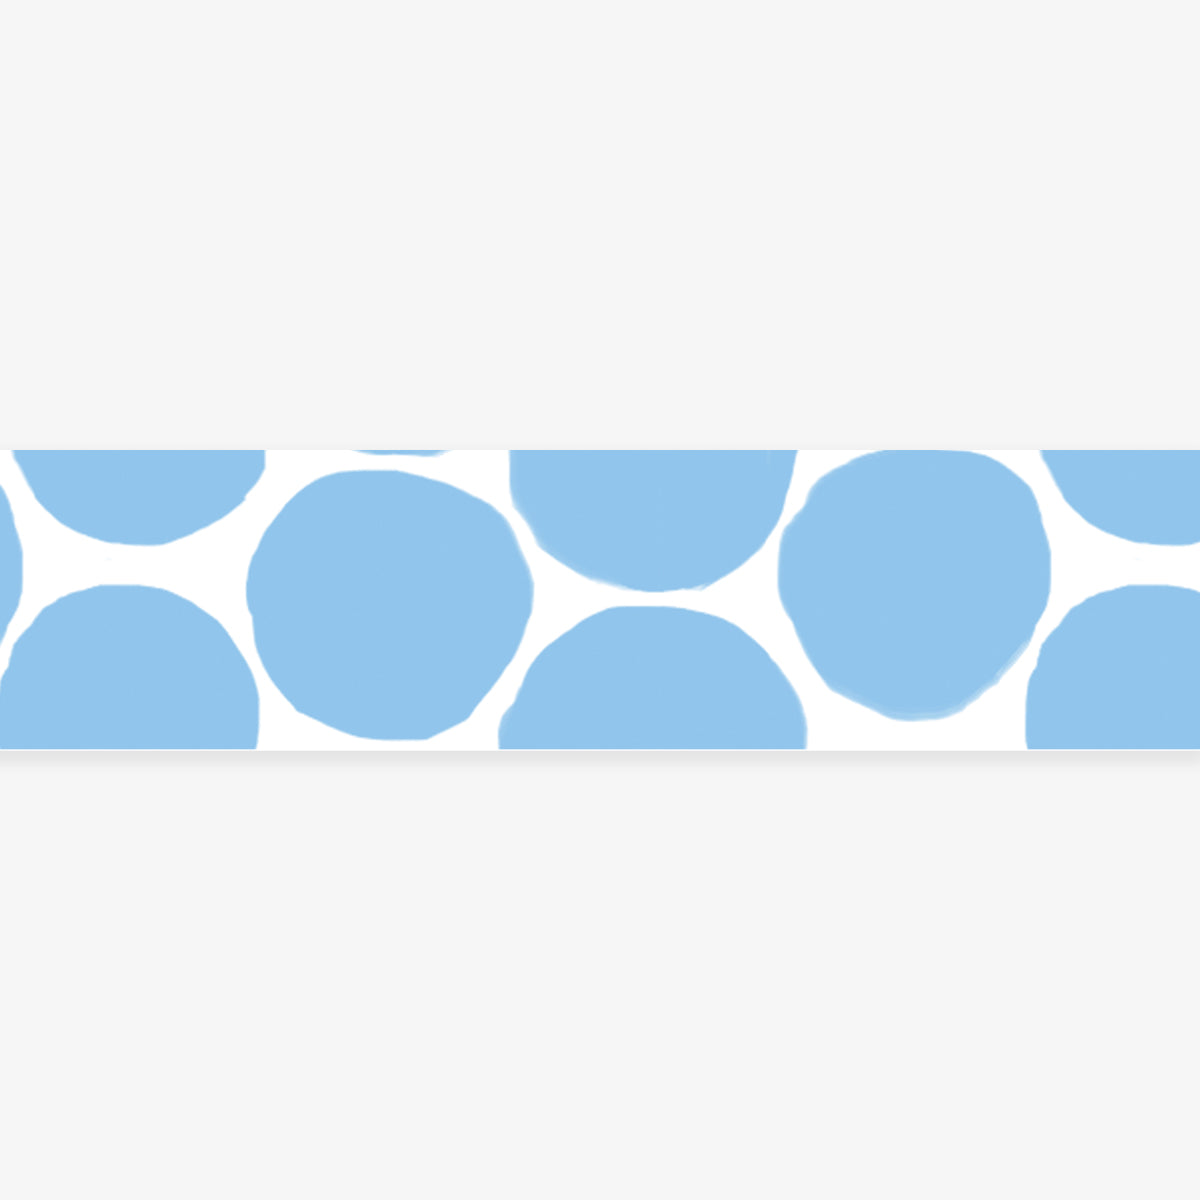 MASTÉ MASKING TAPE // ICE BLUE COIN DOTS